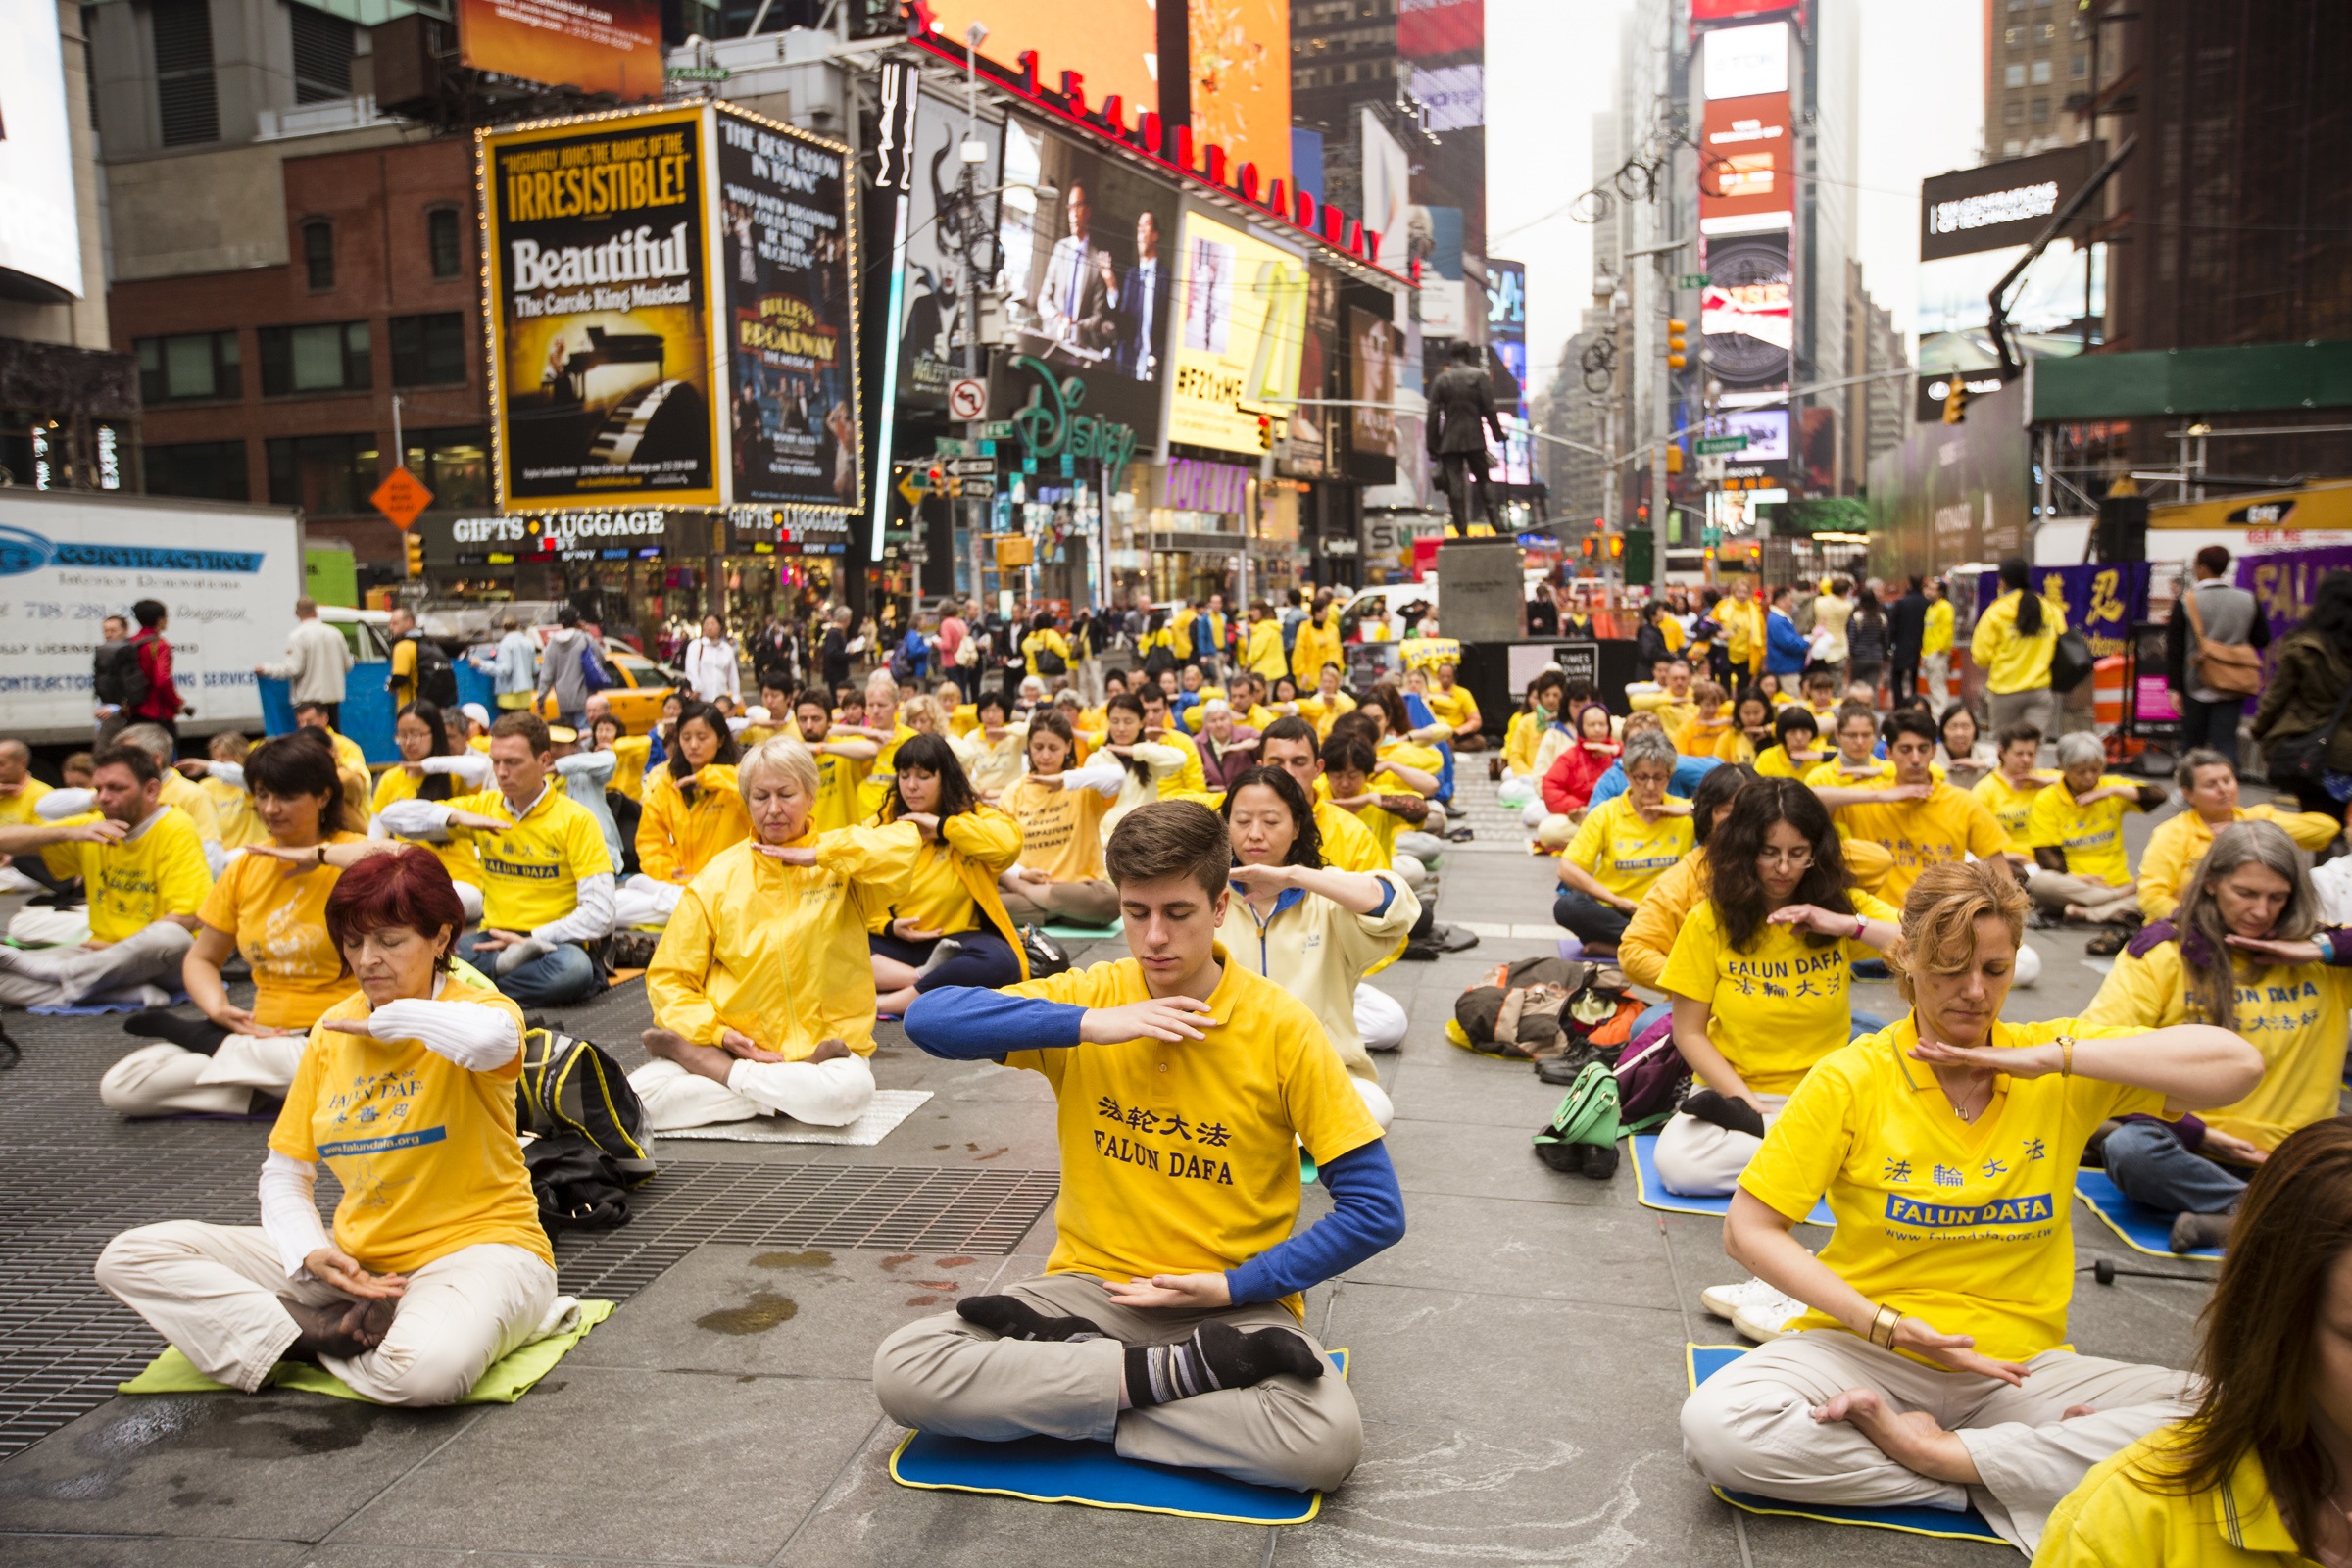 Image for article Times Square: Group Meditation Demonstrates Ancient Practice at Modern “Crossroads of the World”